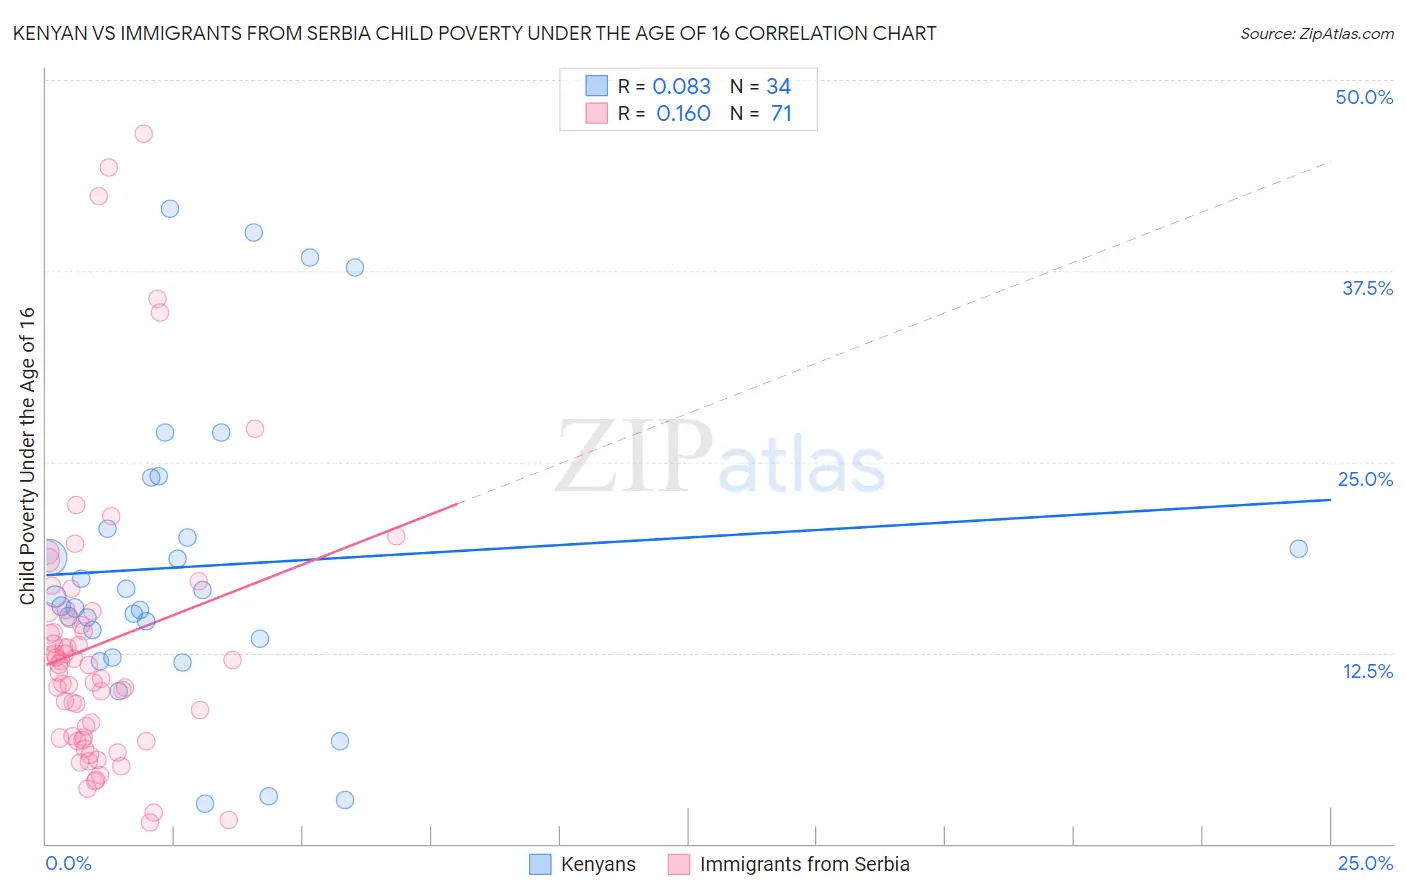 Kenyan vs Immigrants from Serbia Child Poverty Under the Age of 16